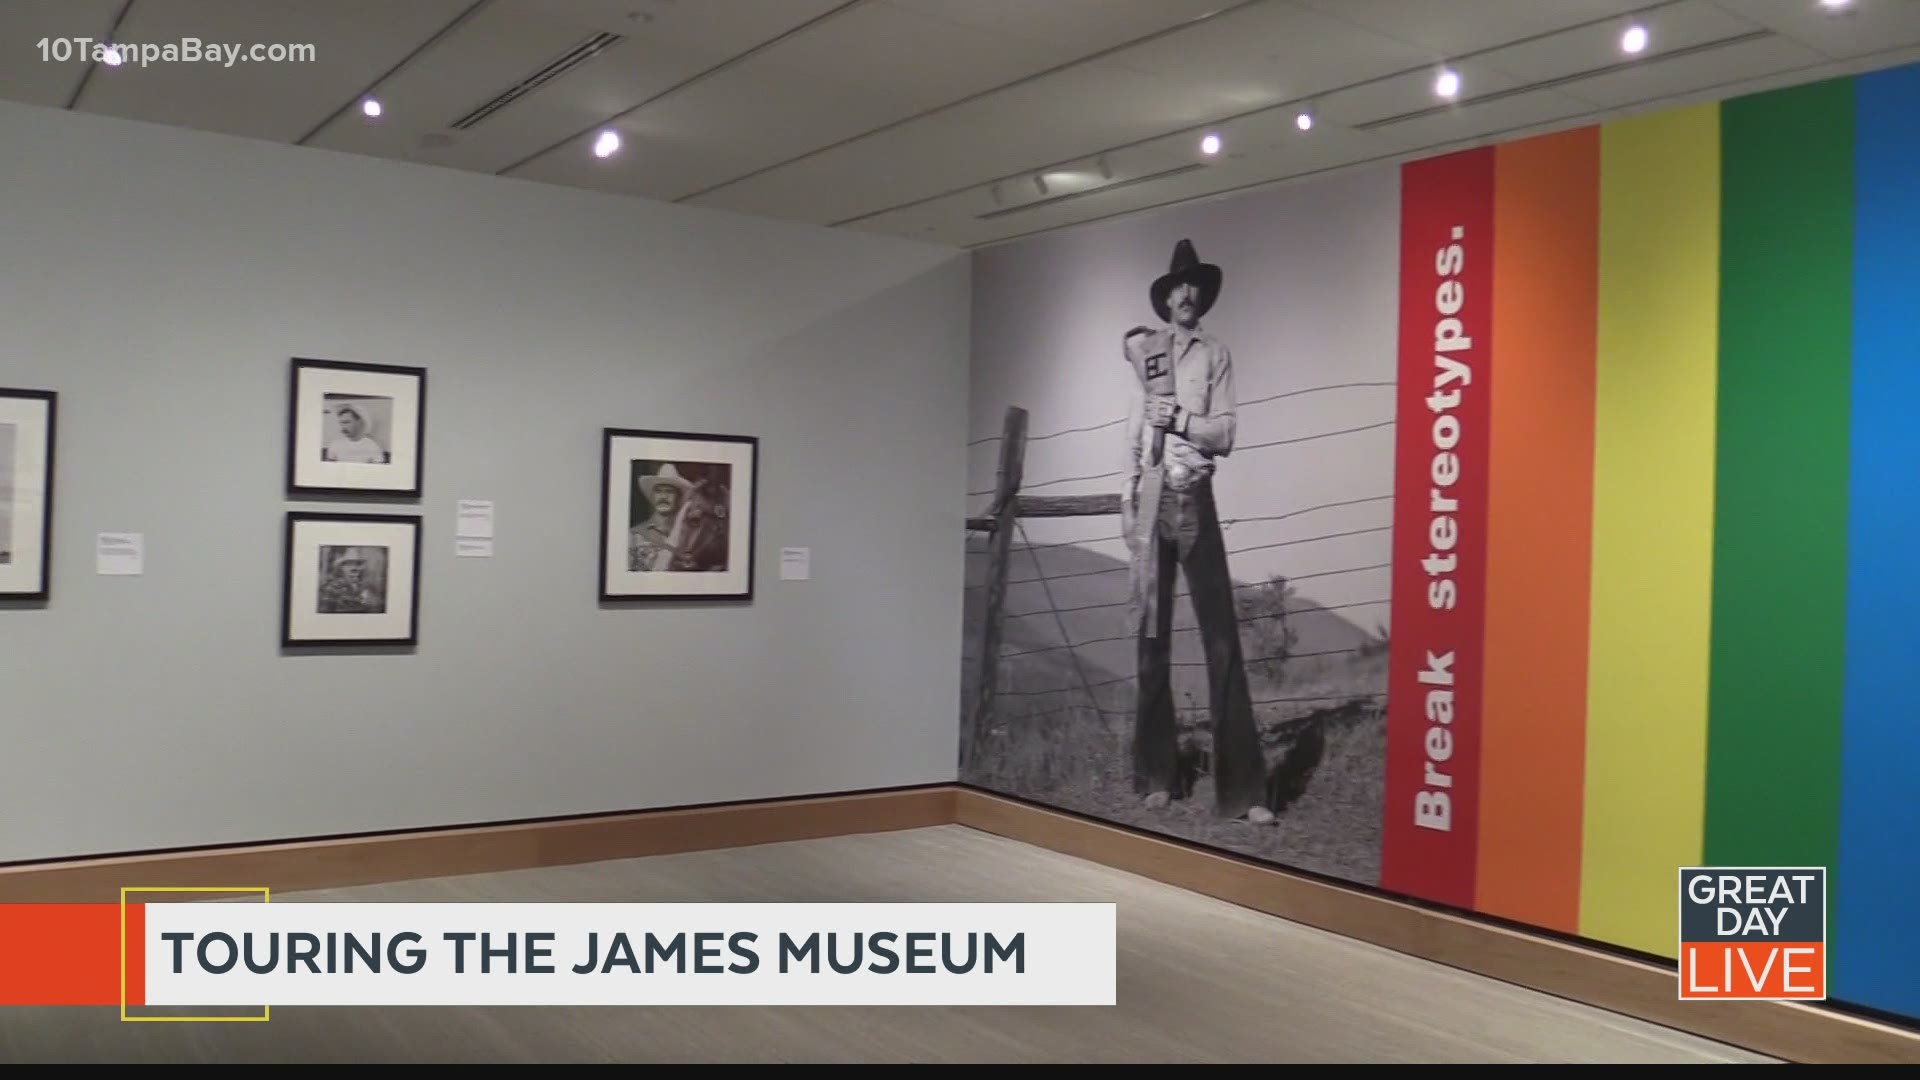 For information on tickets, visit thejamesmuseum.org.